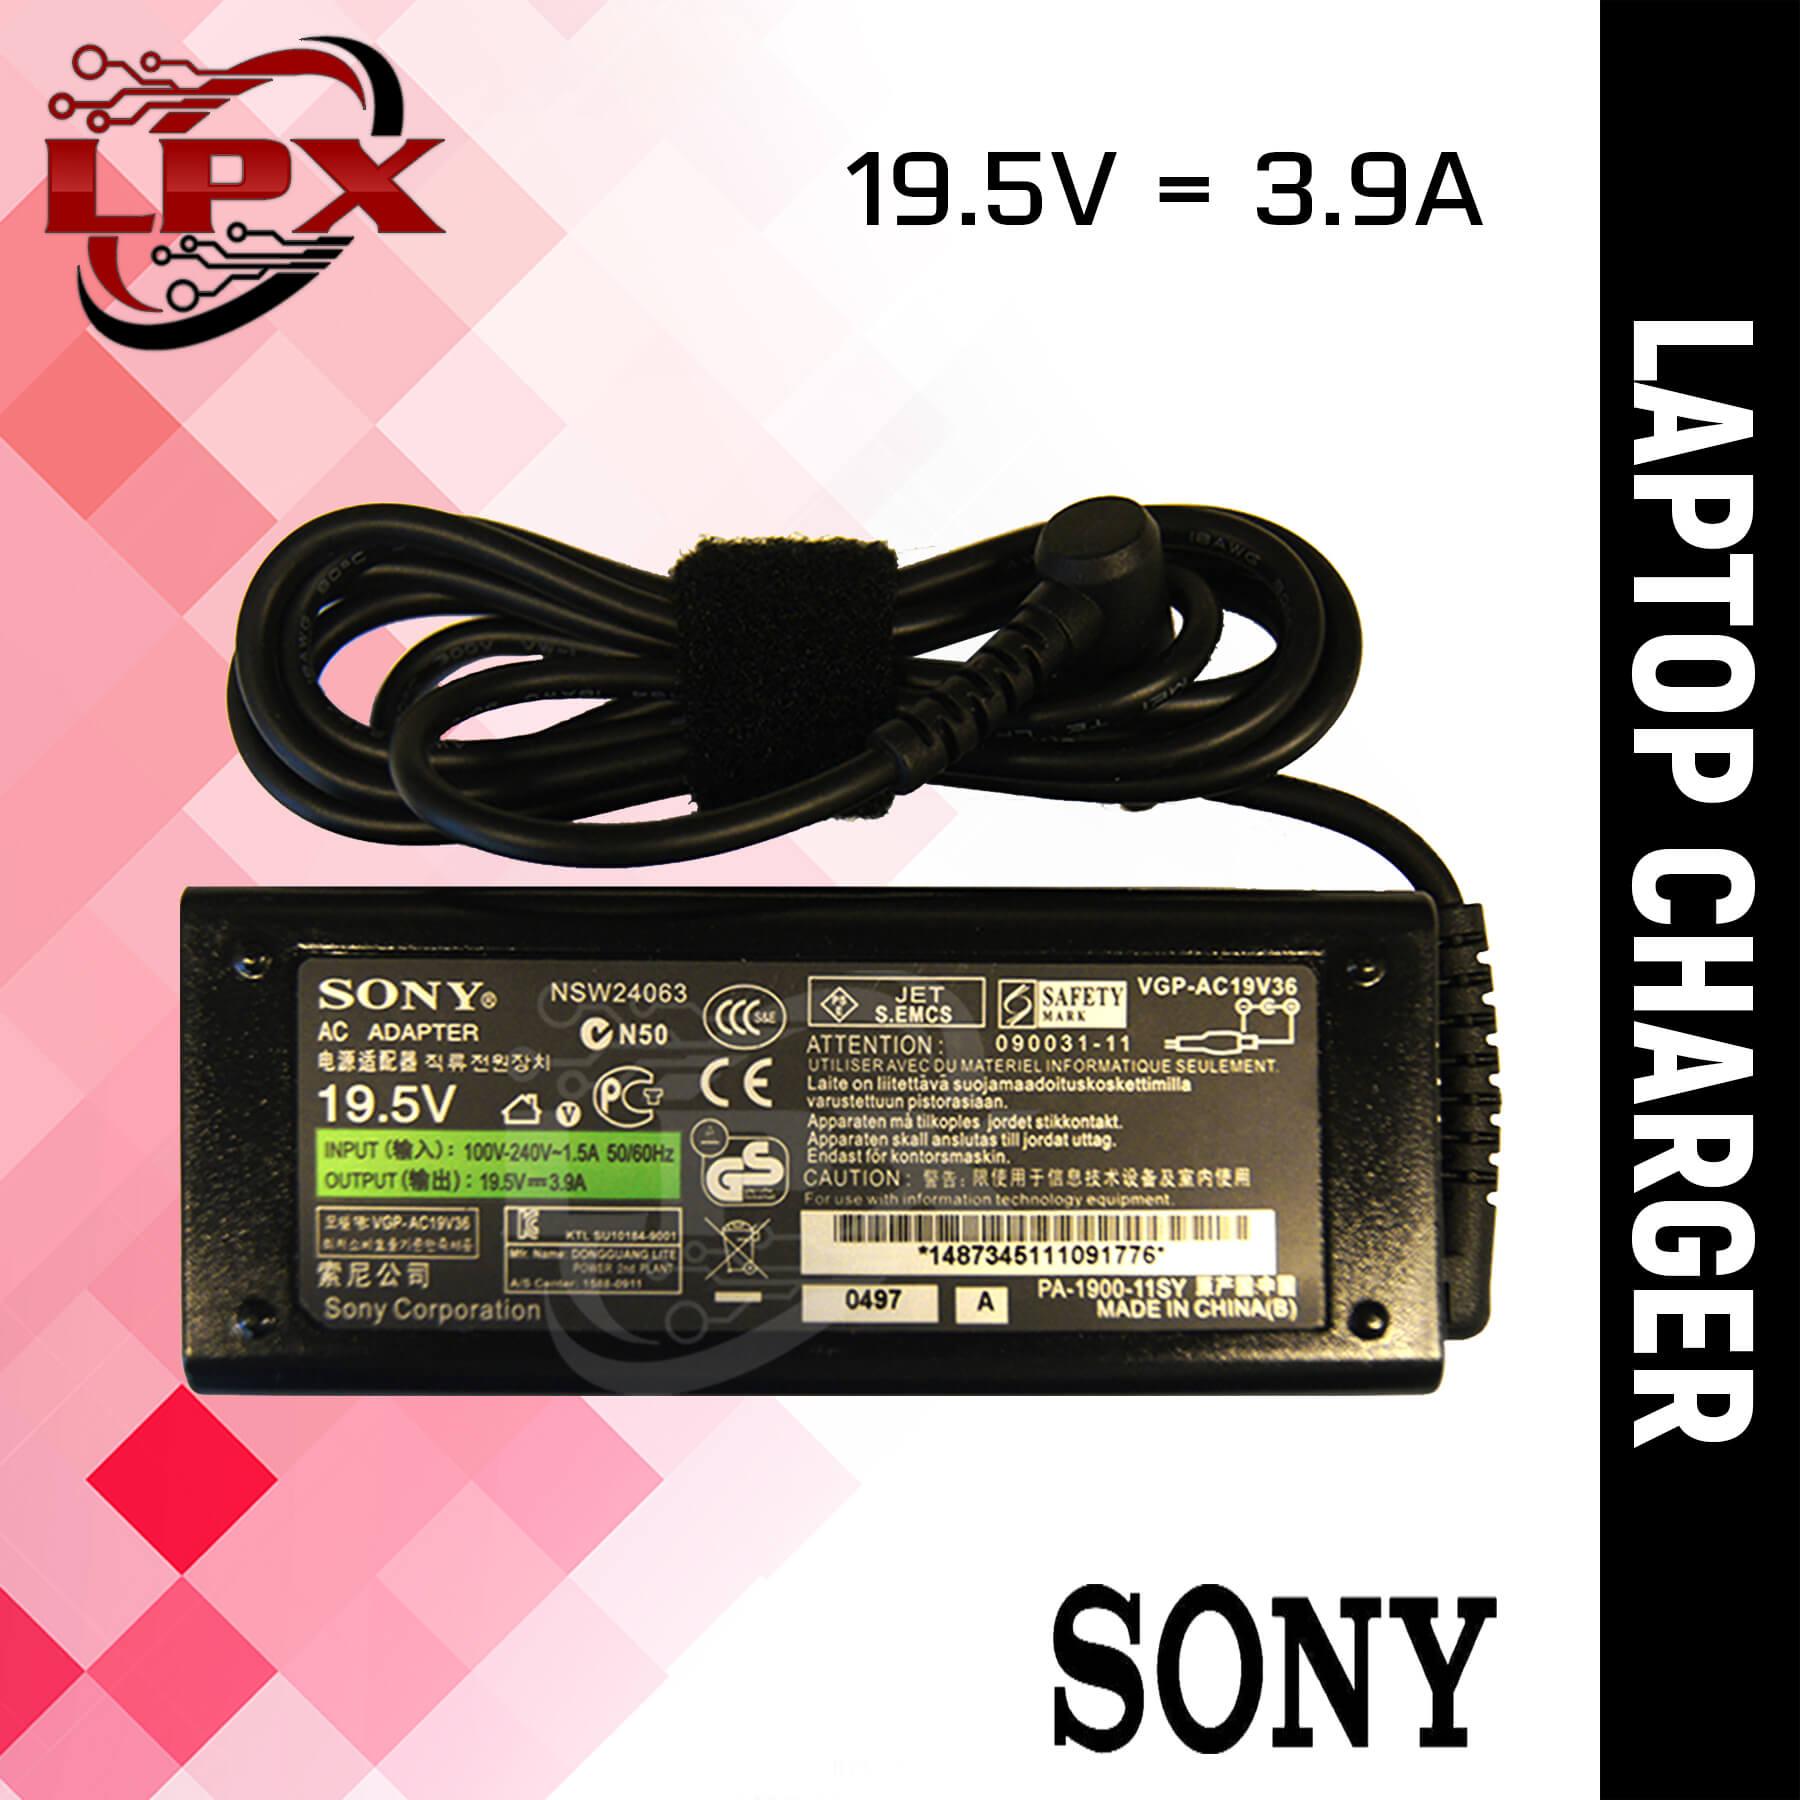 OEM SONY VAIO LAPTOP CHARGER VGP-AC19V37 19.5V 4.7A ADAPTER VGN-NS230E NR11 CR S 